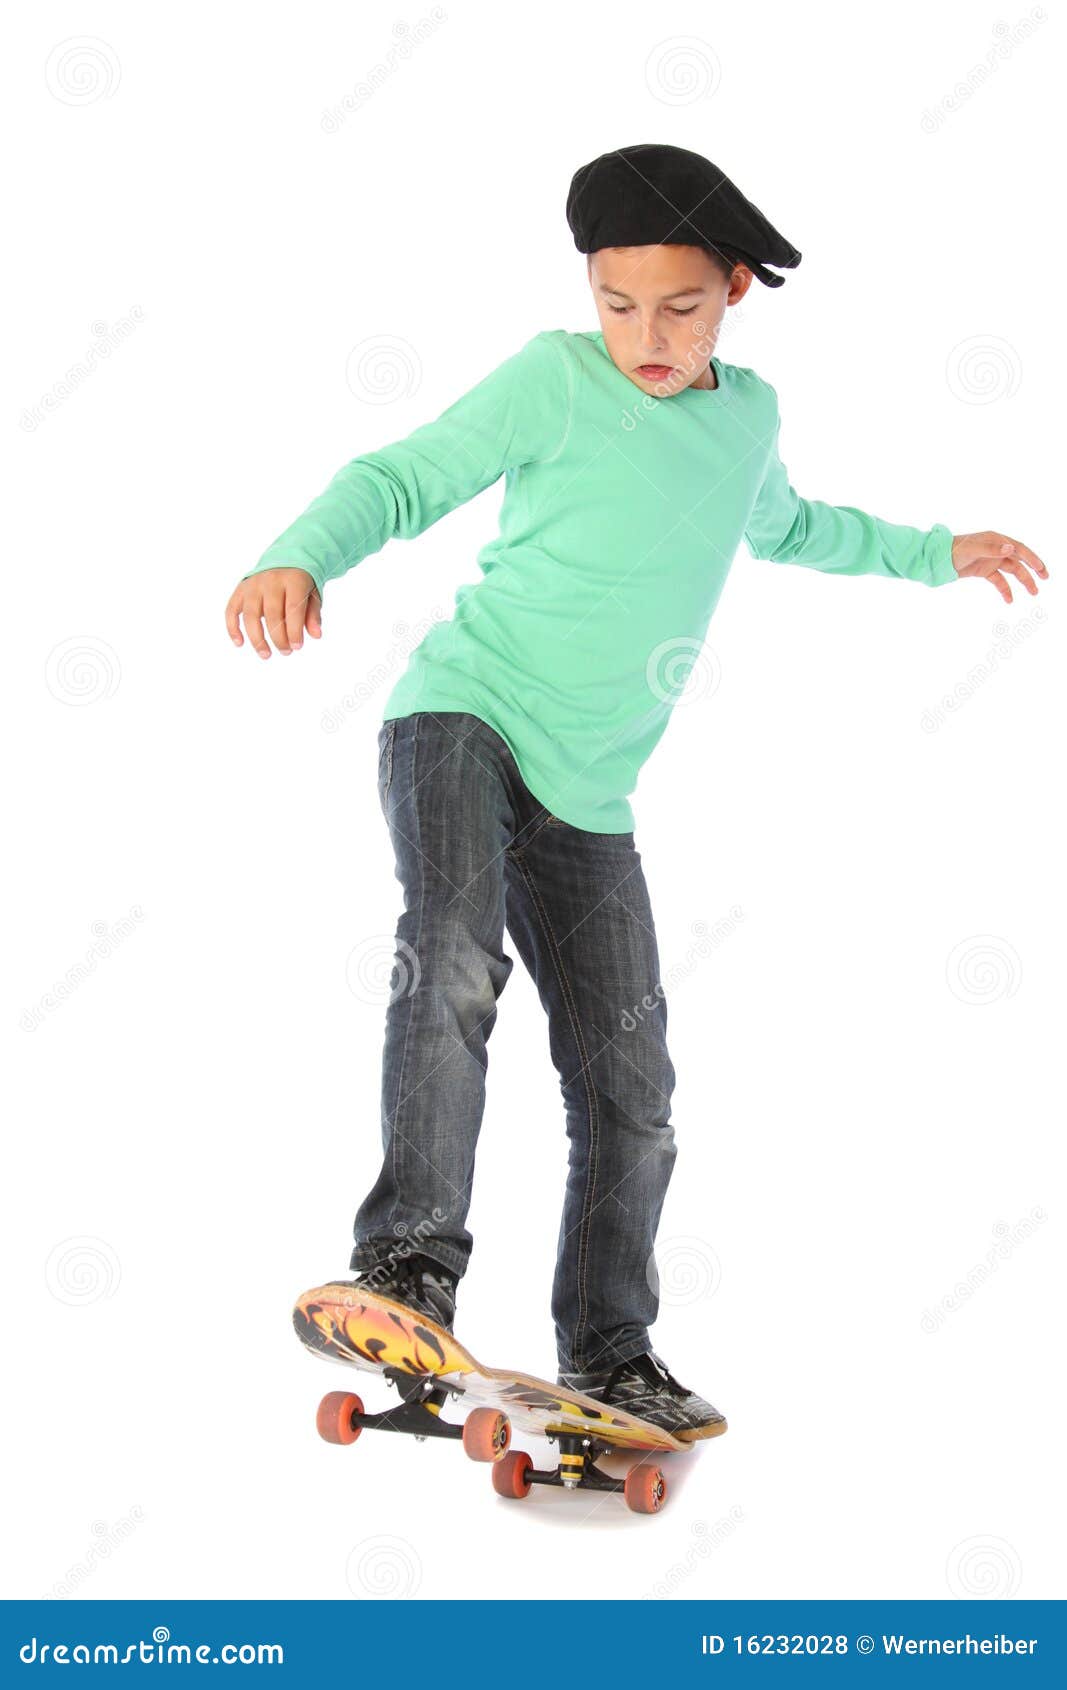 Male kid with a skateboard stock photo. Image of brunette - 16232028